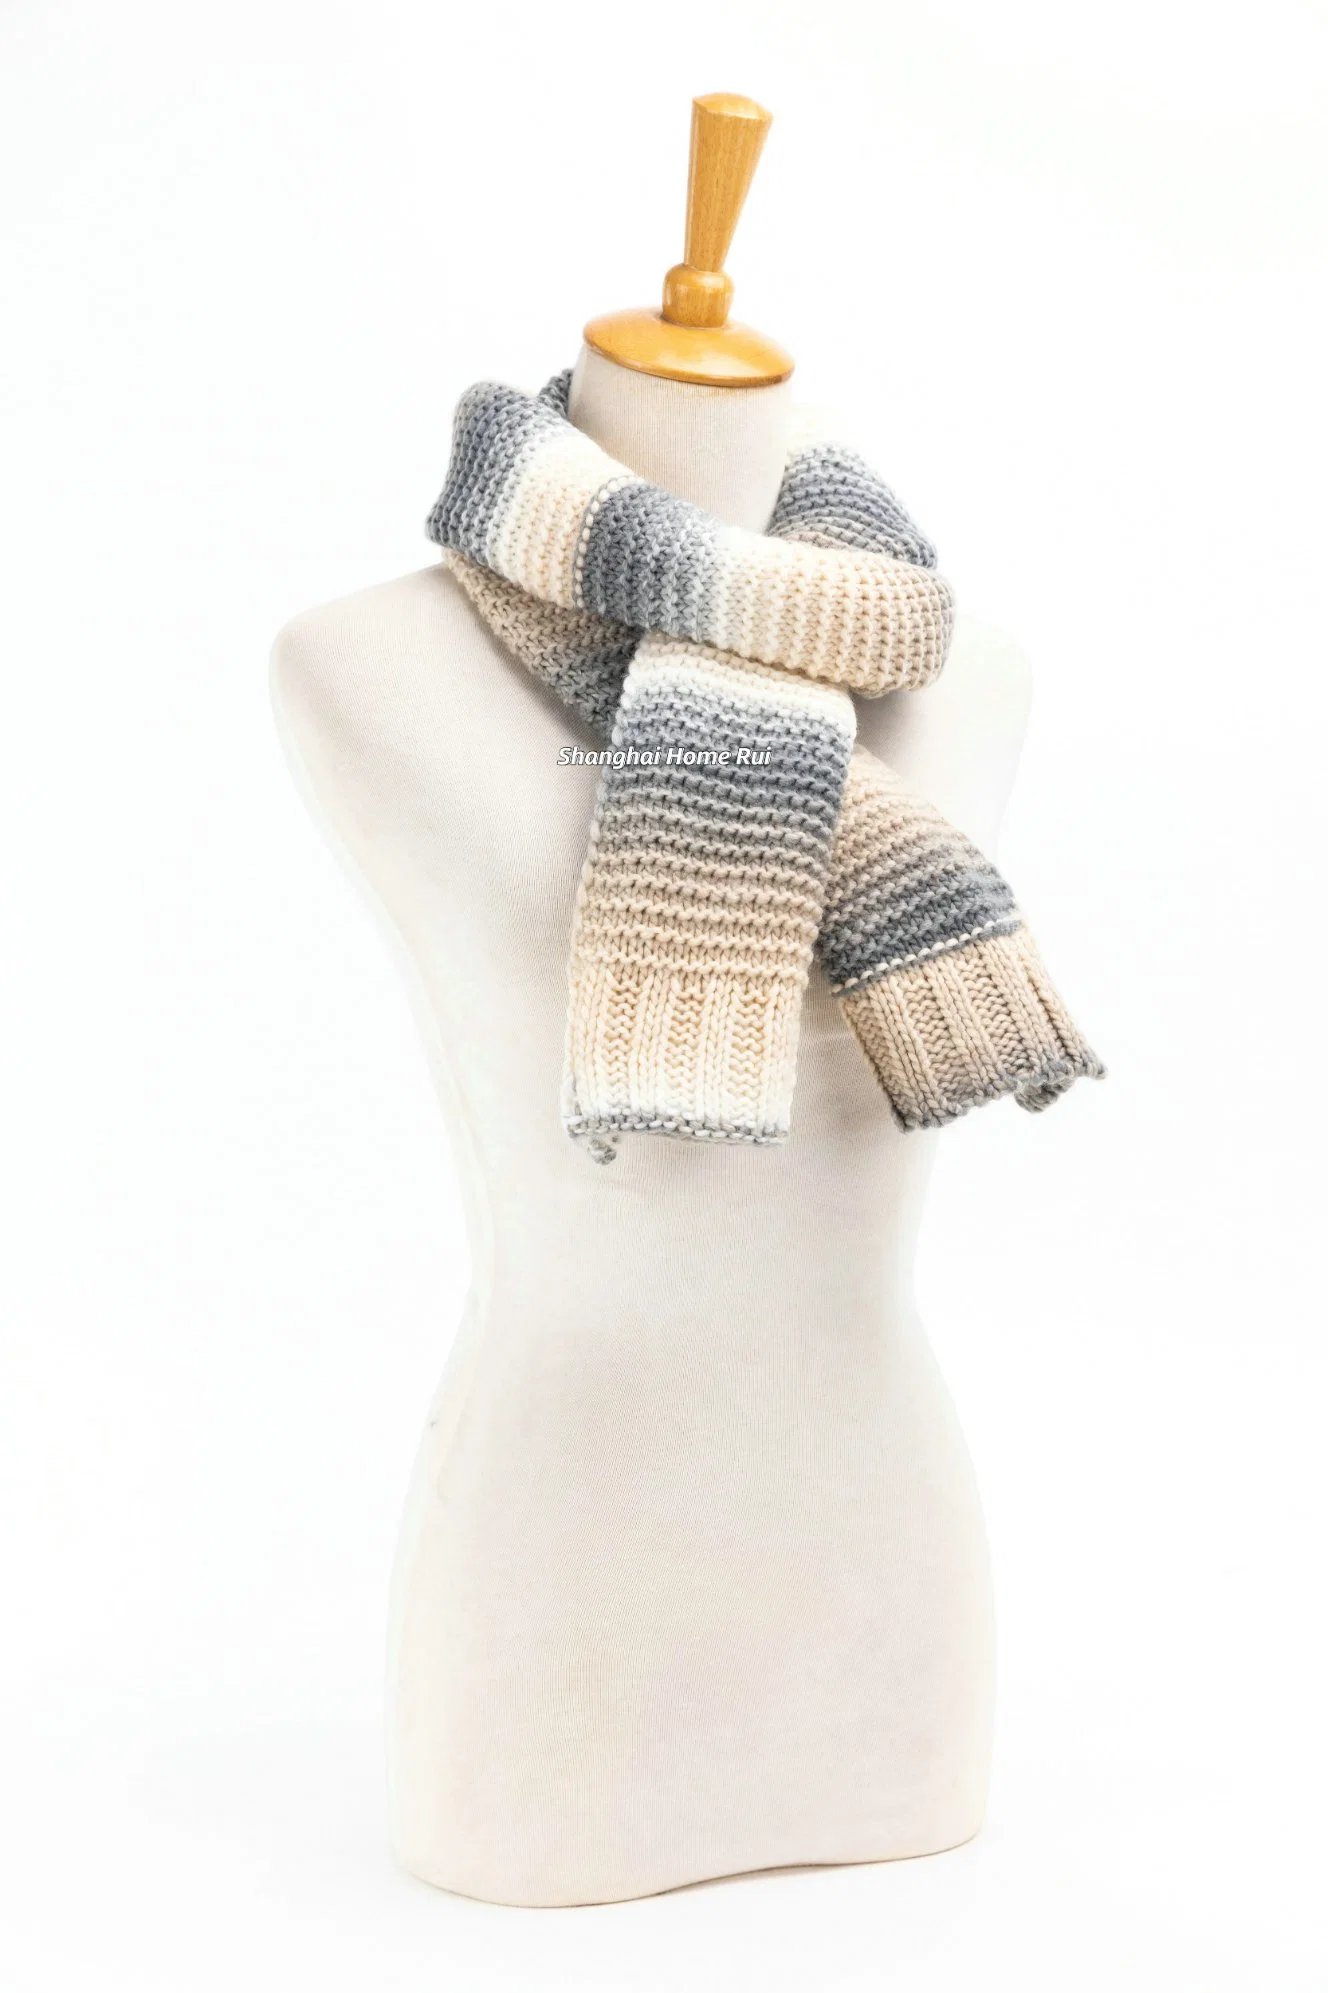 Home Rui Wholesale Outerwear Apparel Accessory Unisex Winter Warmth Beige Acrylic Cashmere Feel Chunky Cozy Fabulous Varigated Striped Blanket Scarf